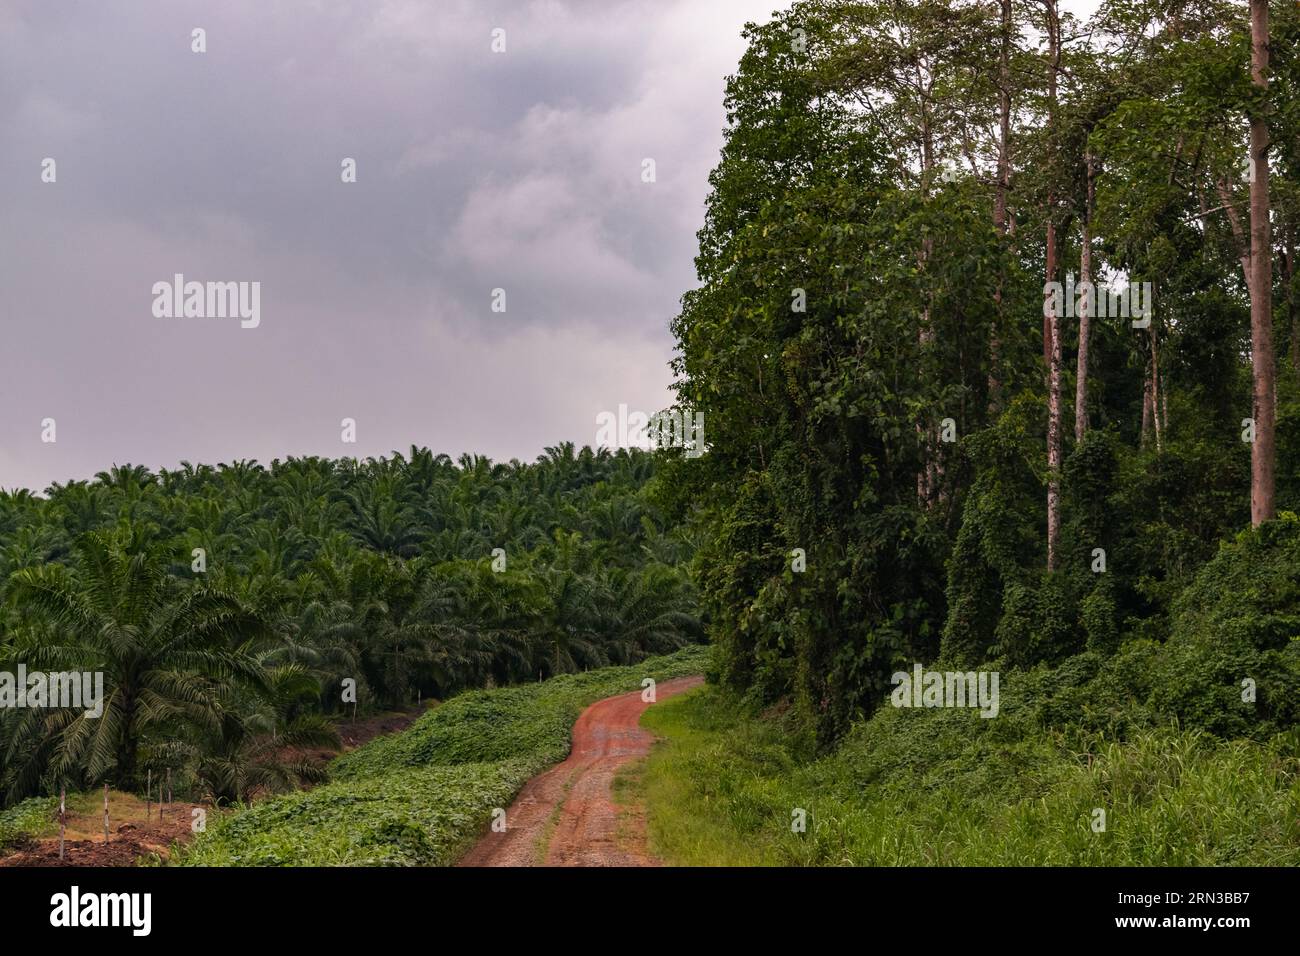 Amazing view of an oil palm plantation and the adjacent rainforest. Very meaningful image Stock Photo